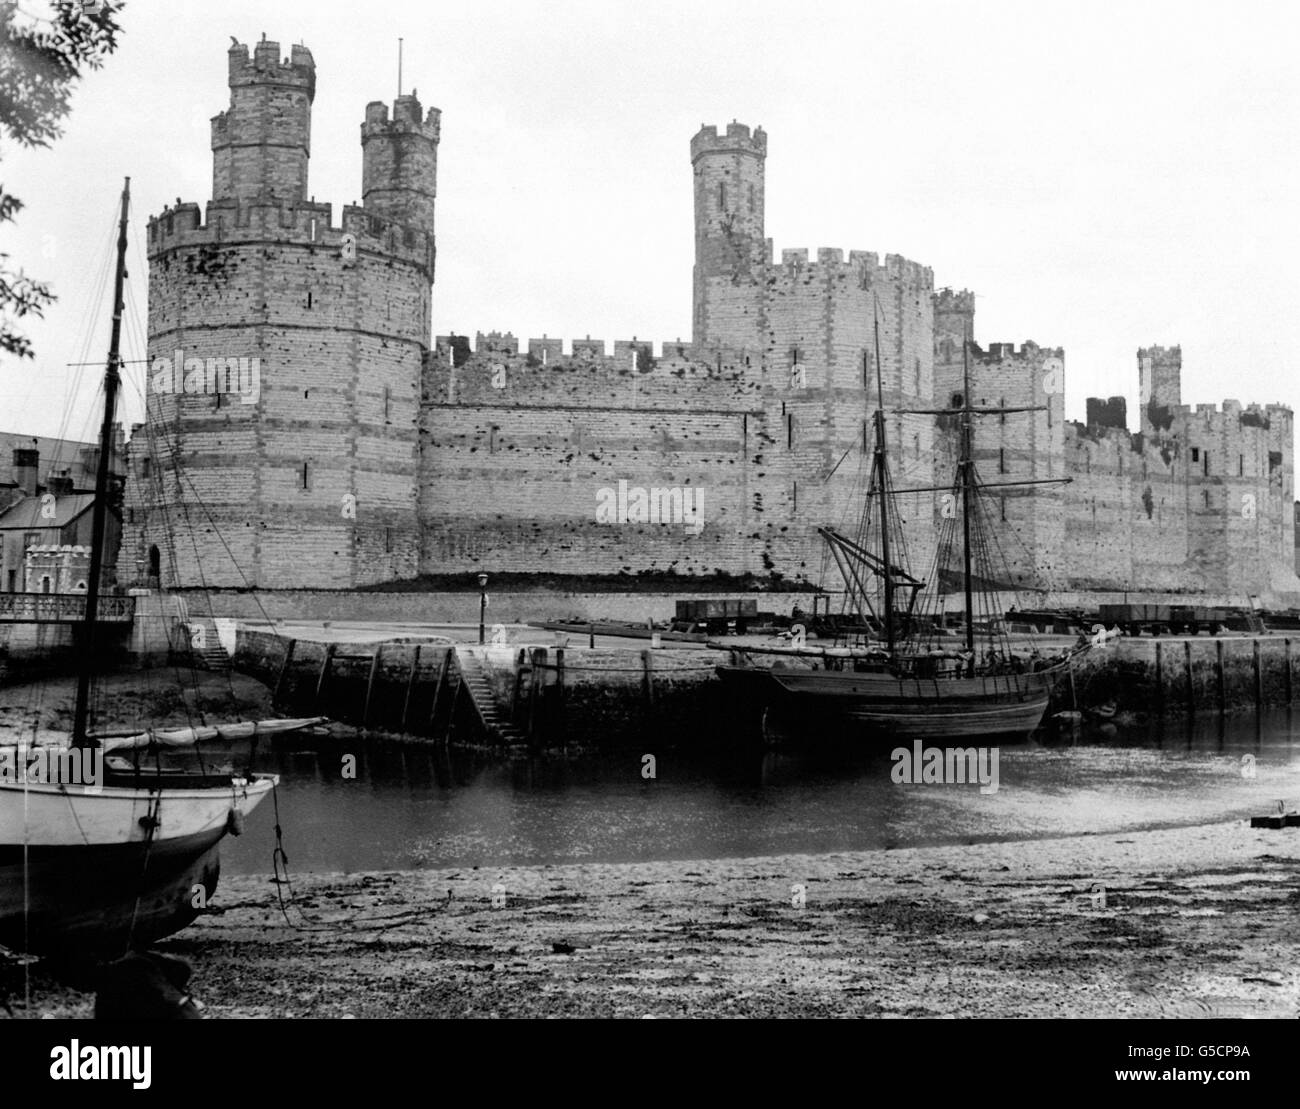 An Edwardian view of Caernarvon castle in North Wales, part of the chain of fortifications built by the English King Edward I in the 13th century to subdue the rebellious Welsh. The architecture was influenced by the Theodosian walls of Constantinople. Stock Photo